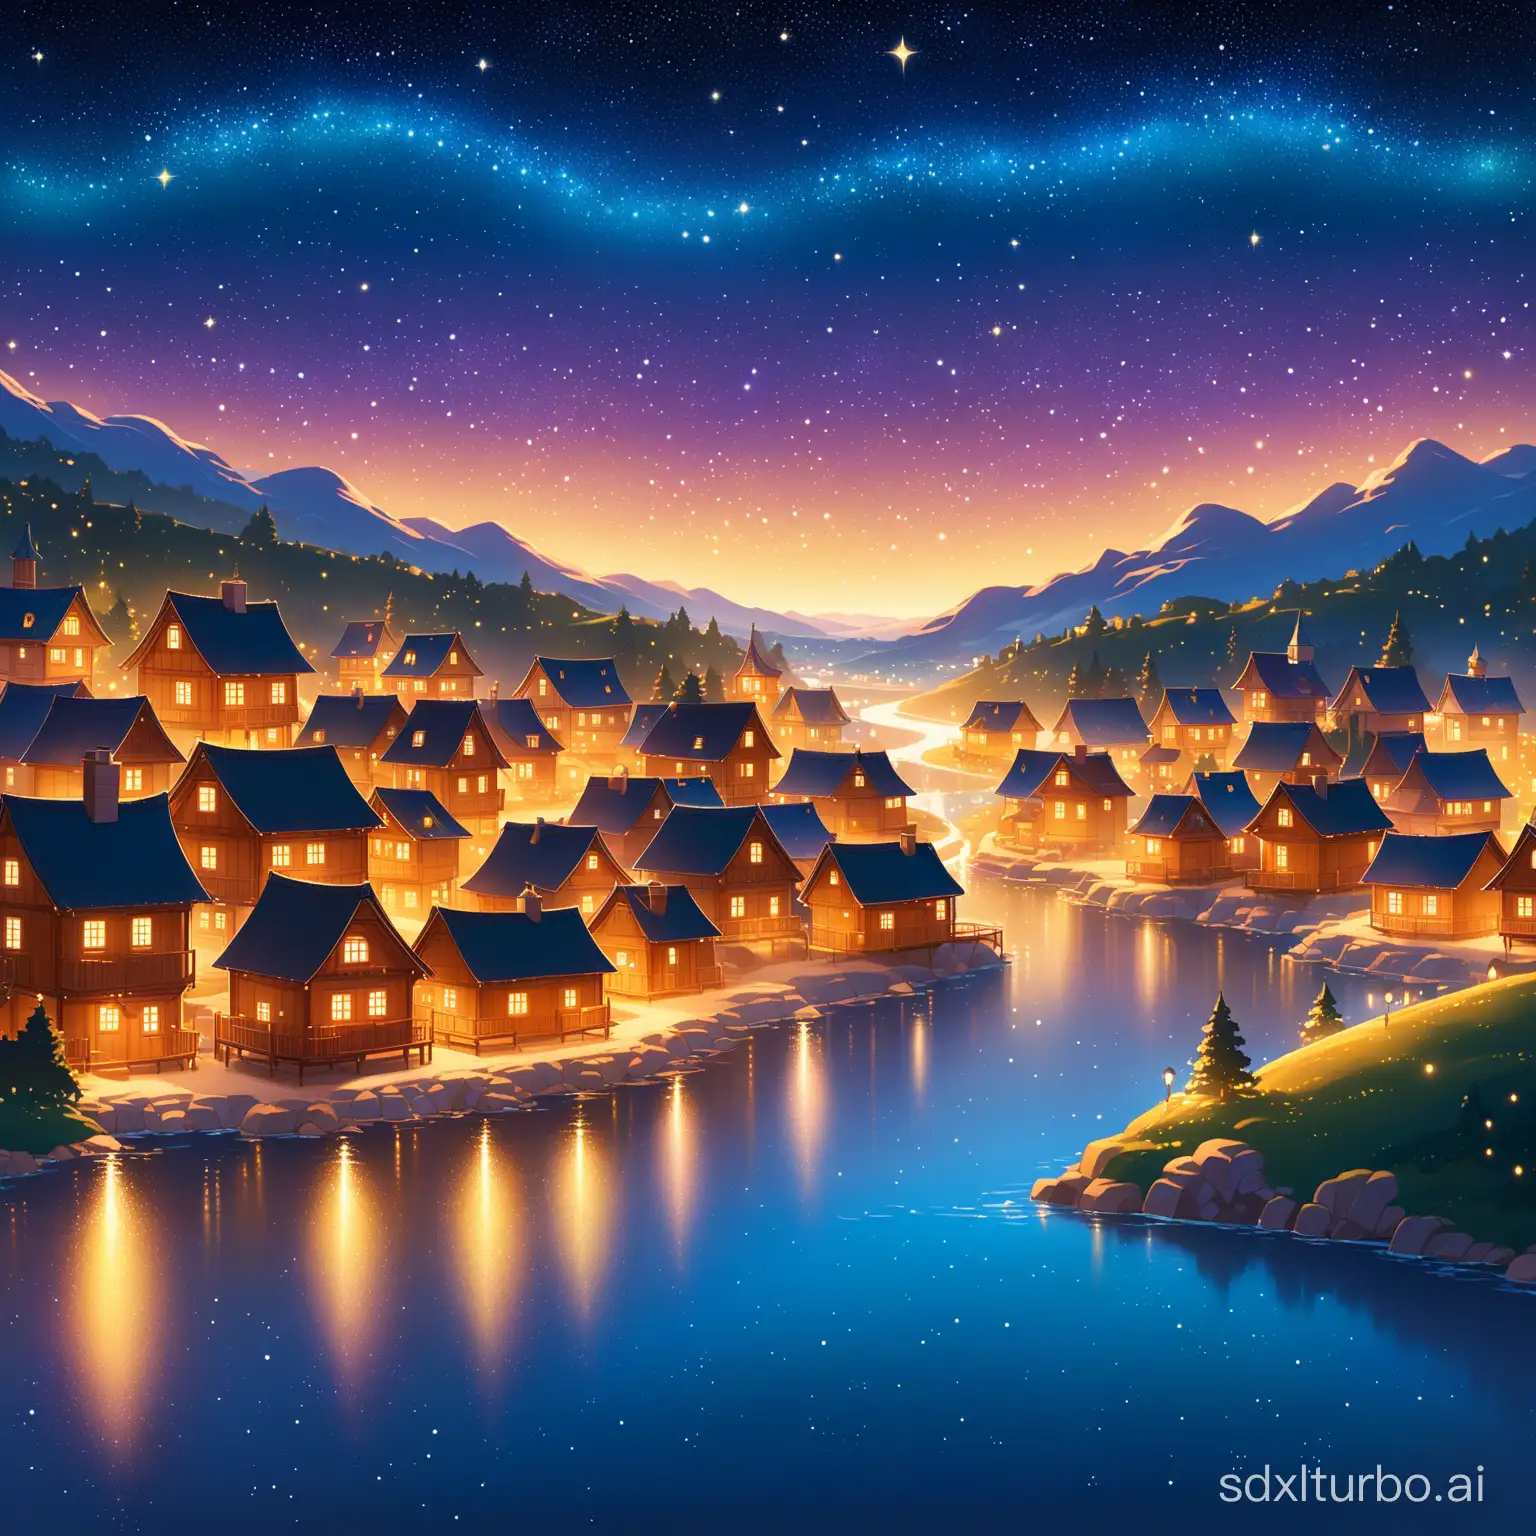 Starry-Night-in-a-DisneyStyle-Tranquil-Town